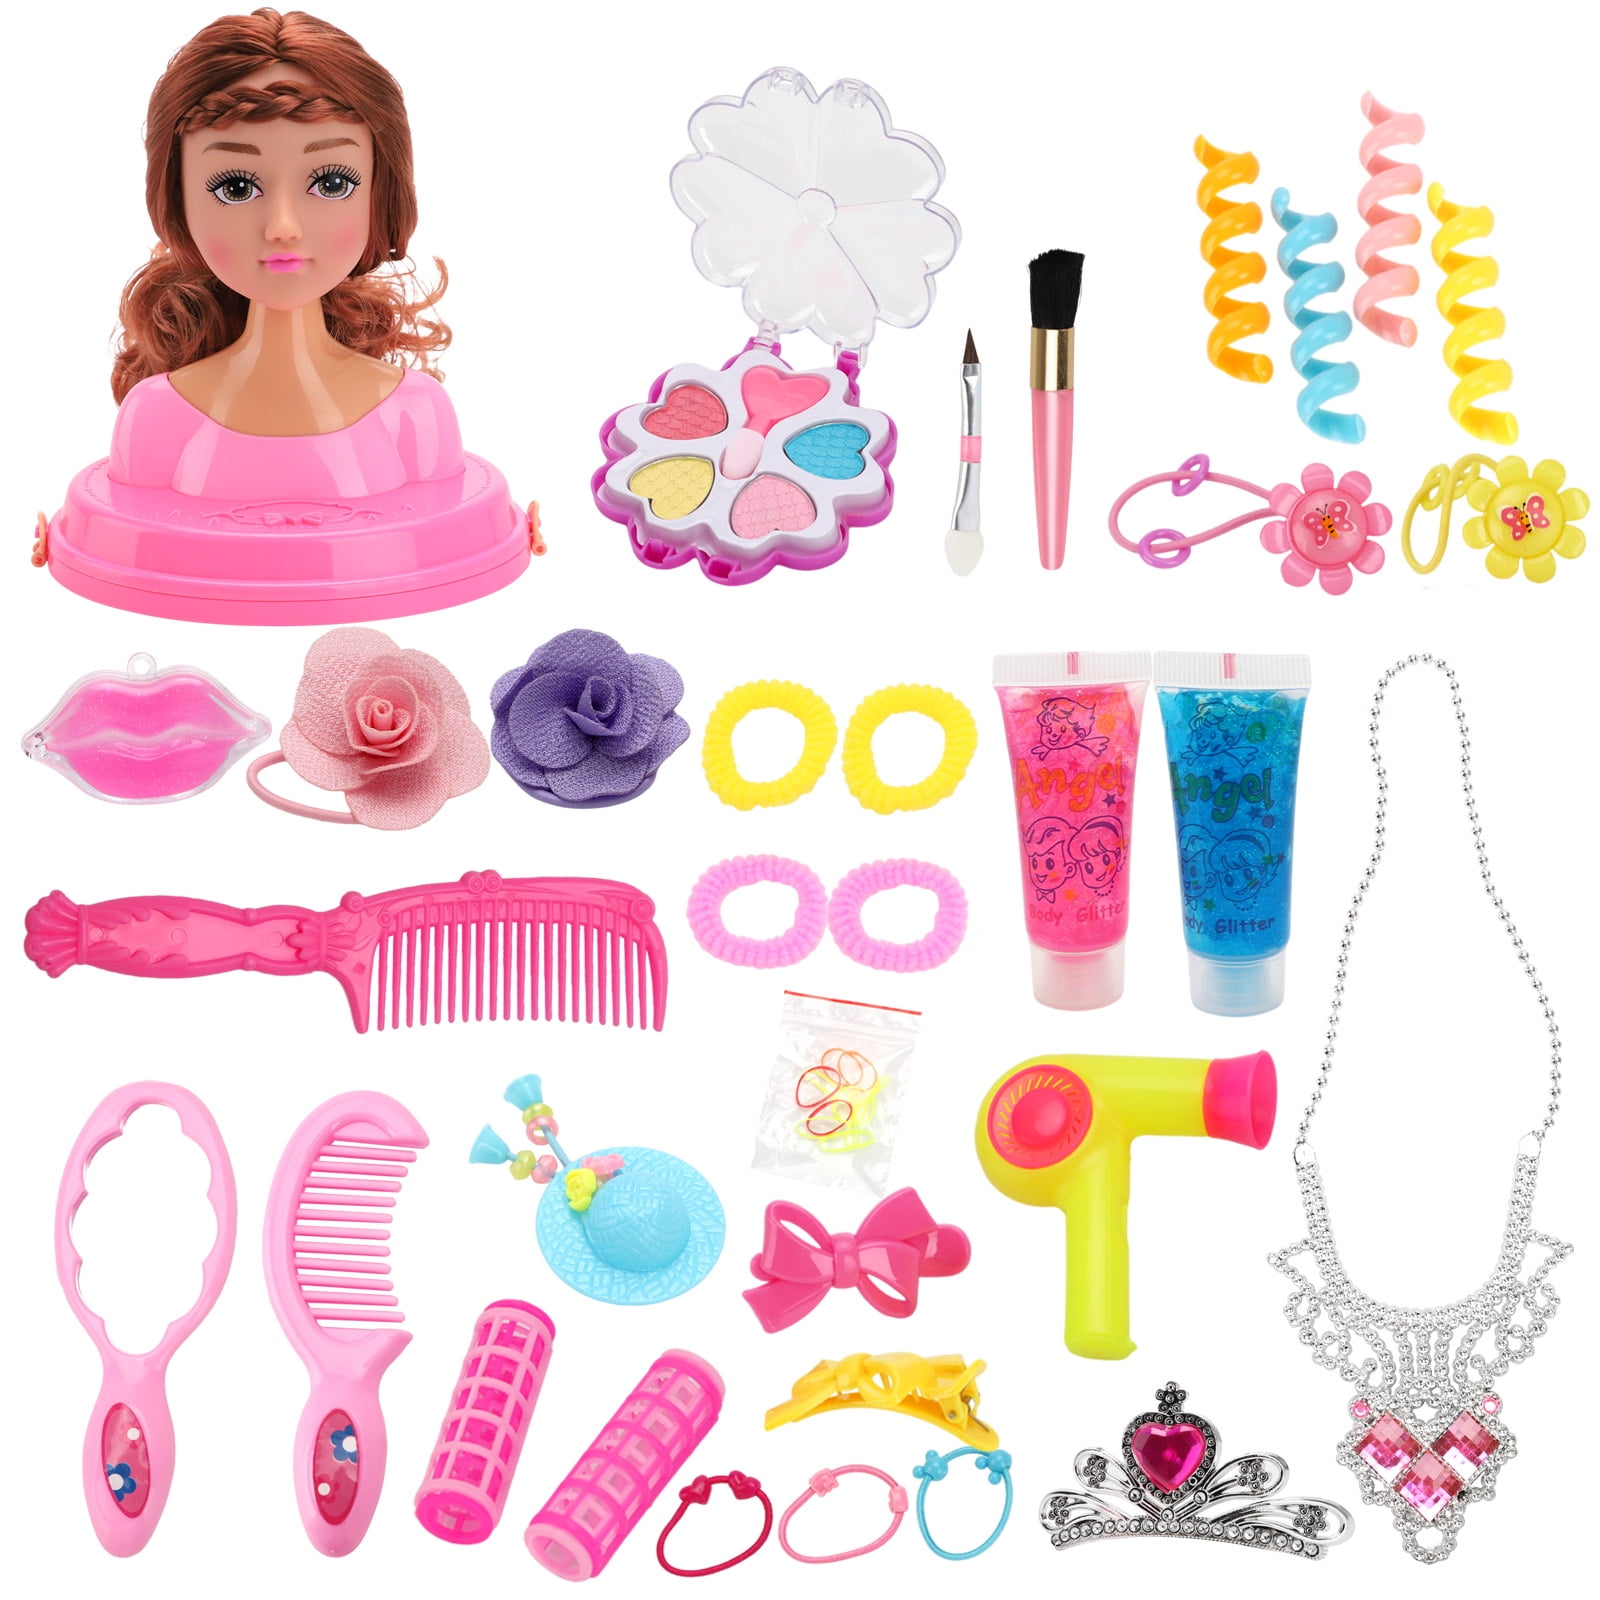 Styling Doll Doll Head For Hair Styling With Hair Dryer Doll Head Toy  Pretend Play Cosmetic Set Comb Rubber Band Dressing Case